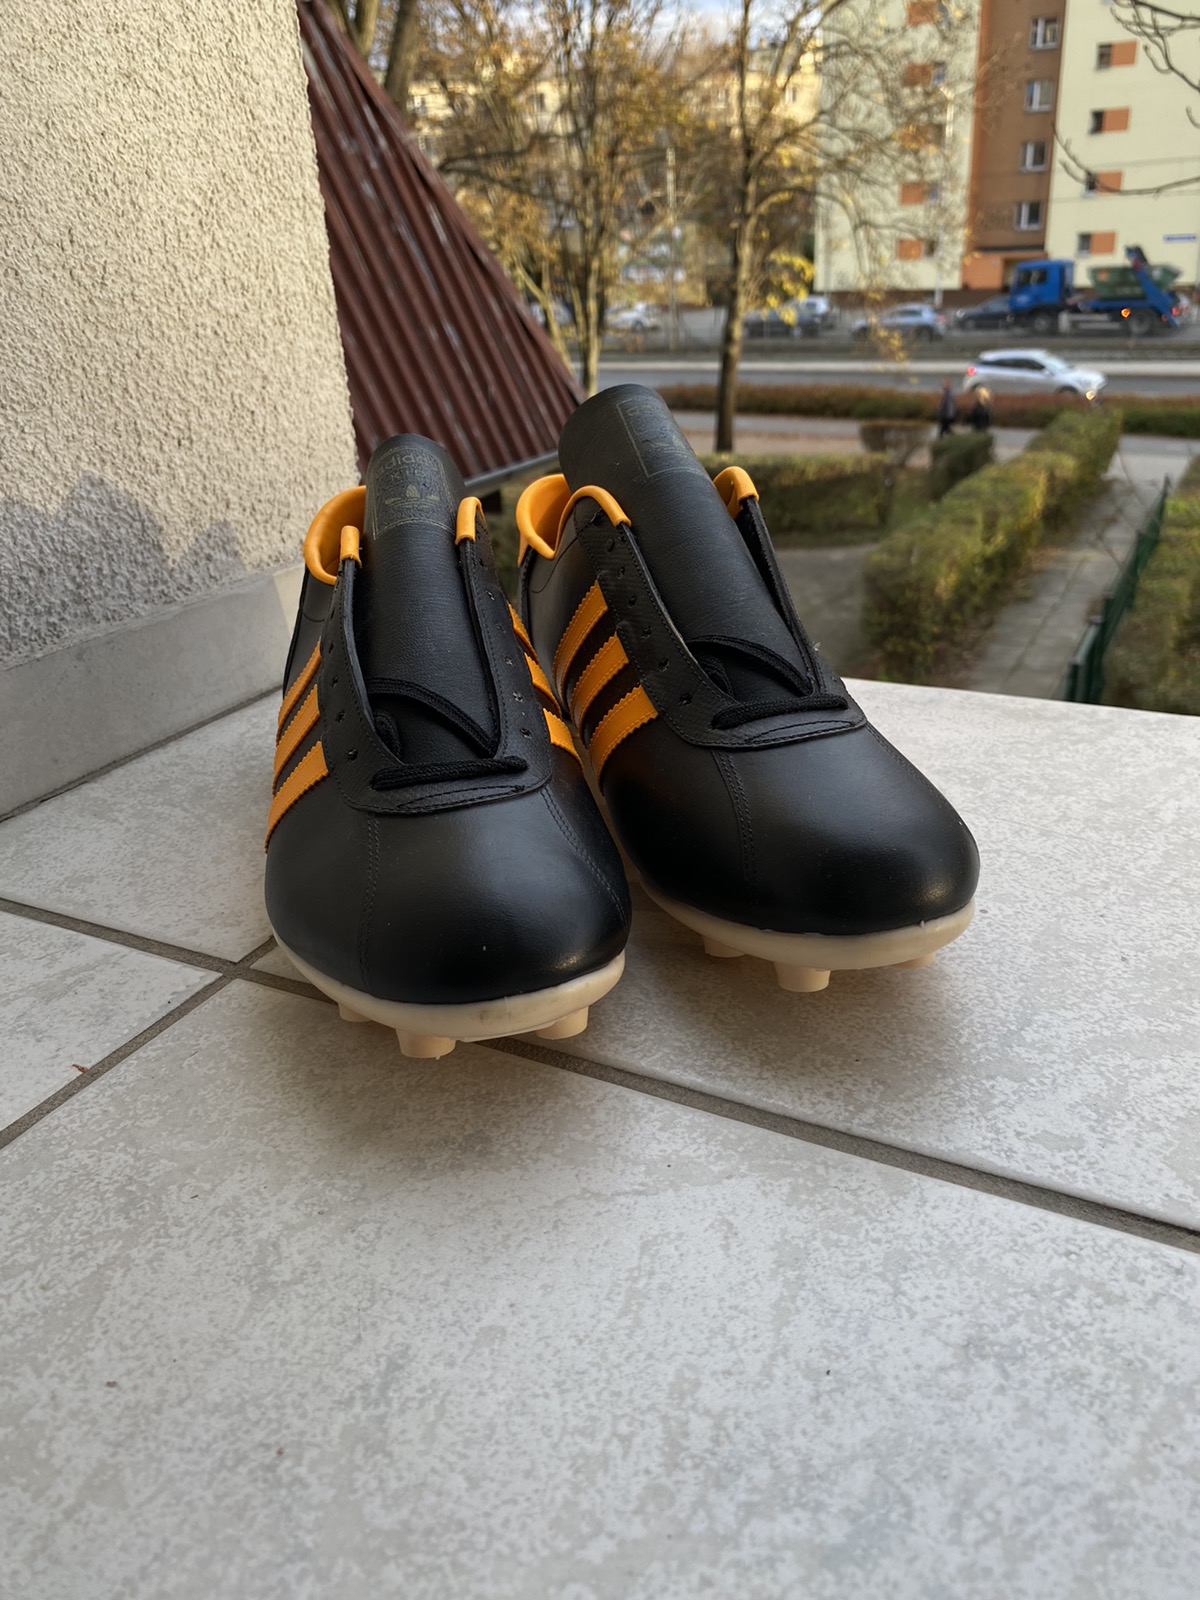 Adidas Kid made in France 70-80s football boots - 2